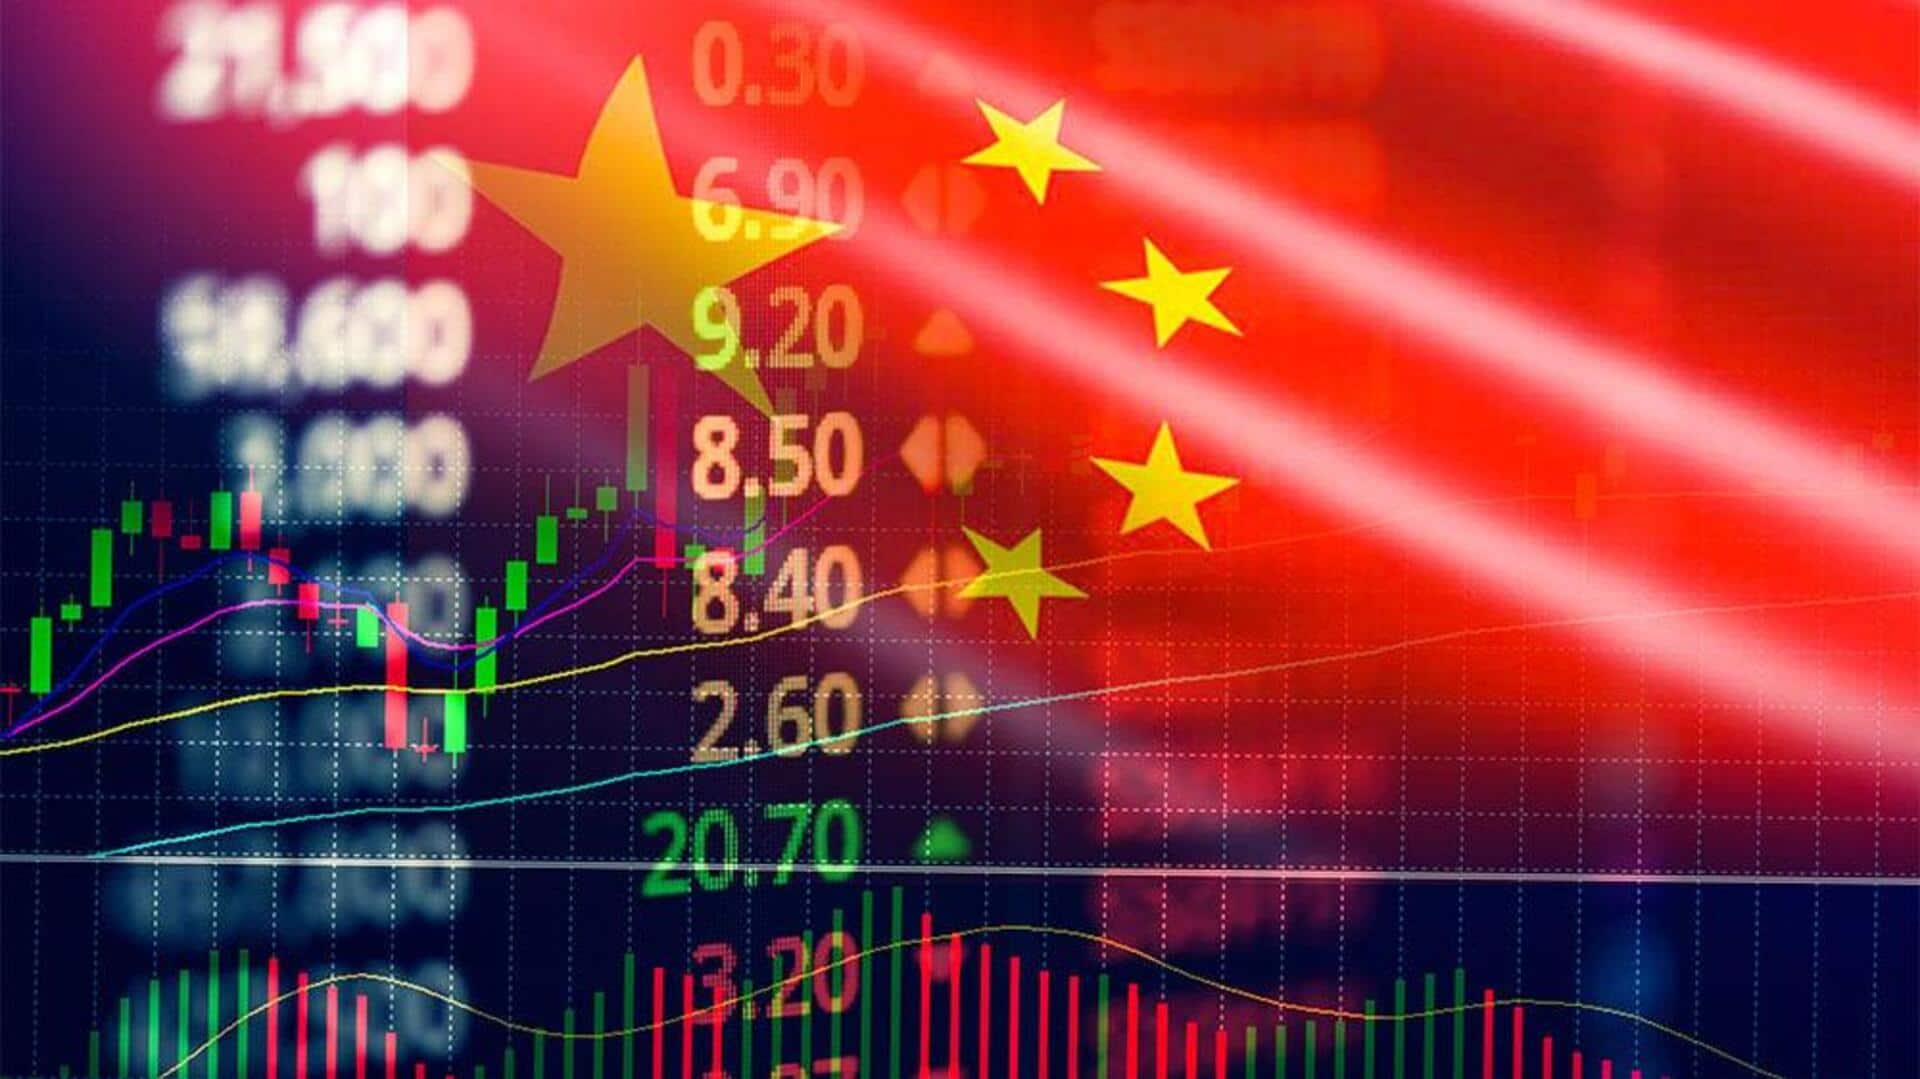 Amidst plummeting stocks, China restricts shorting of stock index futures